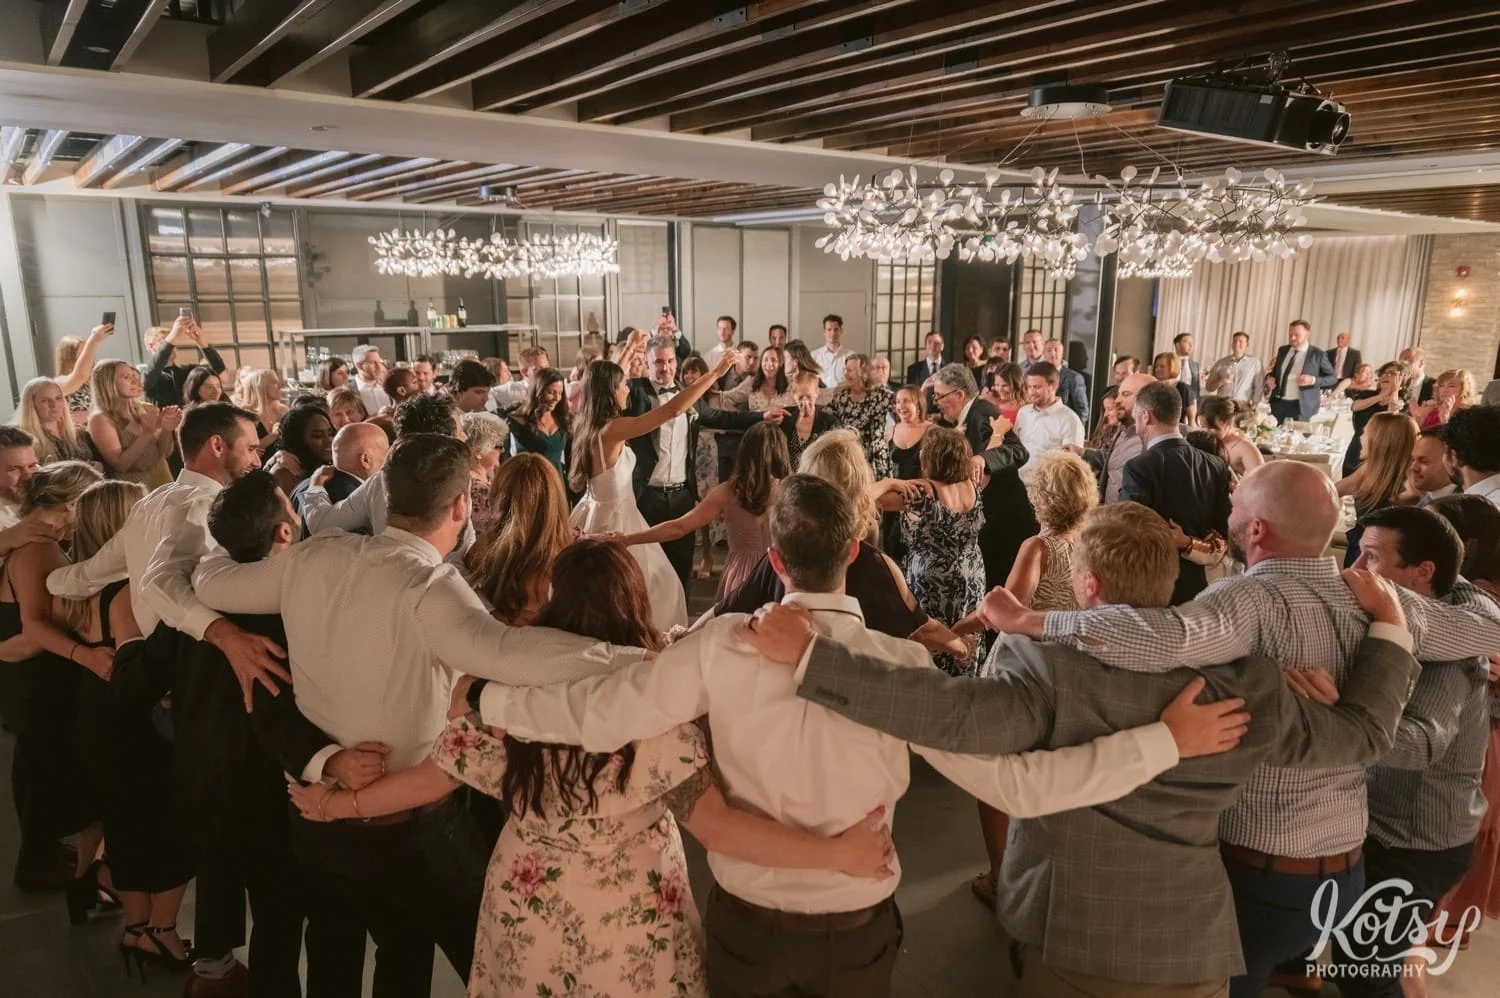 A room full of people dance in a circle with their arms around each other during a Village Loft wedding reception in Toronto, Canada